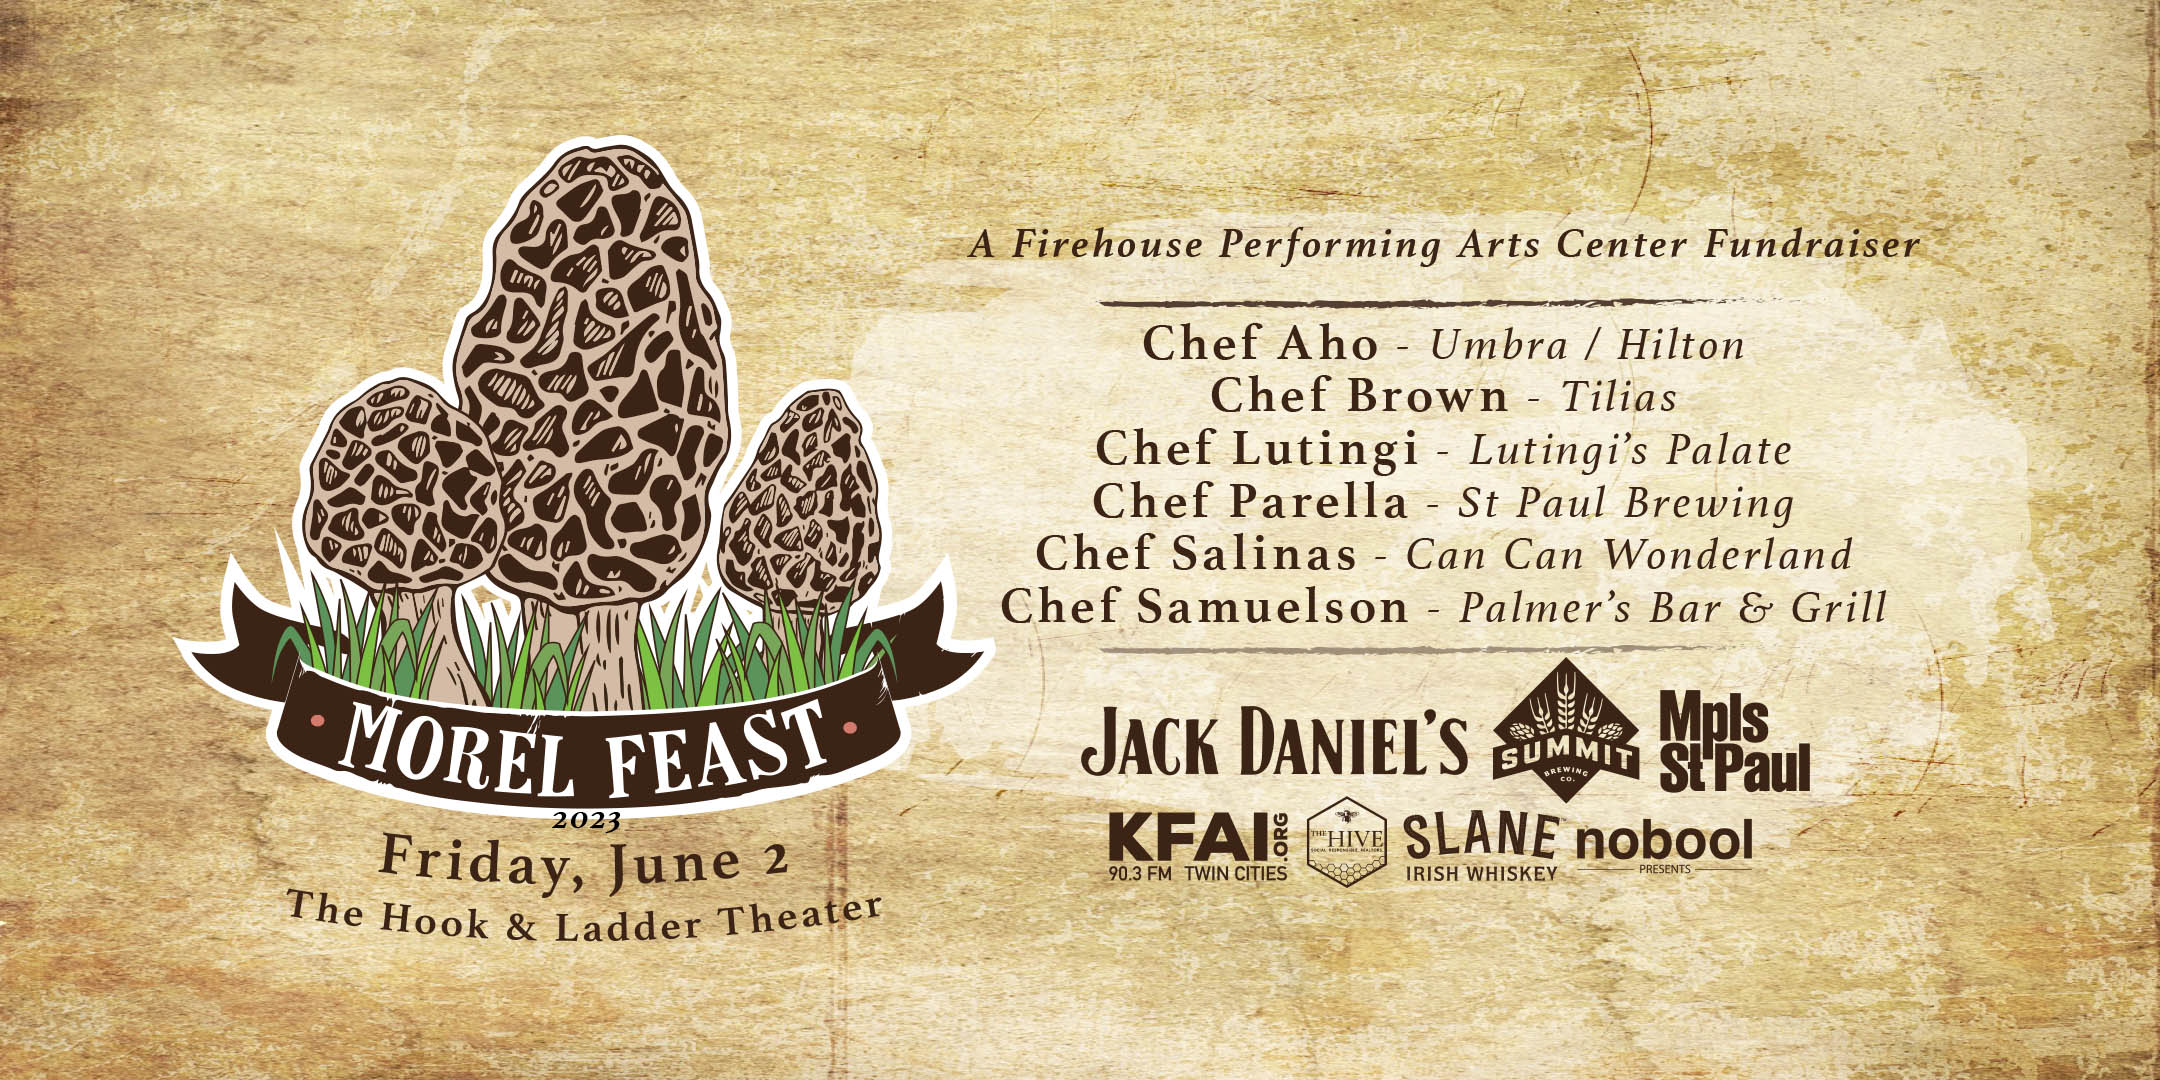 Morel Feast Fundraiser Friday, June 2 Under The Canopy at The Hook and Ladder Theater Cocktails & Snacks - 6pm Dinner - 7:00pm 21+ Reservations: $100 (Tickets limited) NO REFUNDS